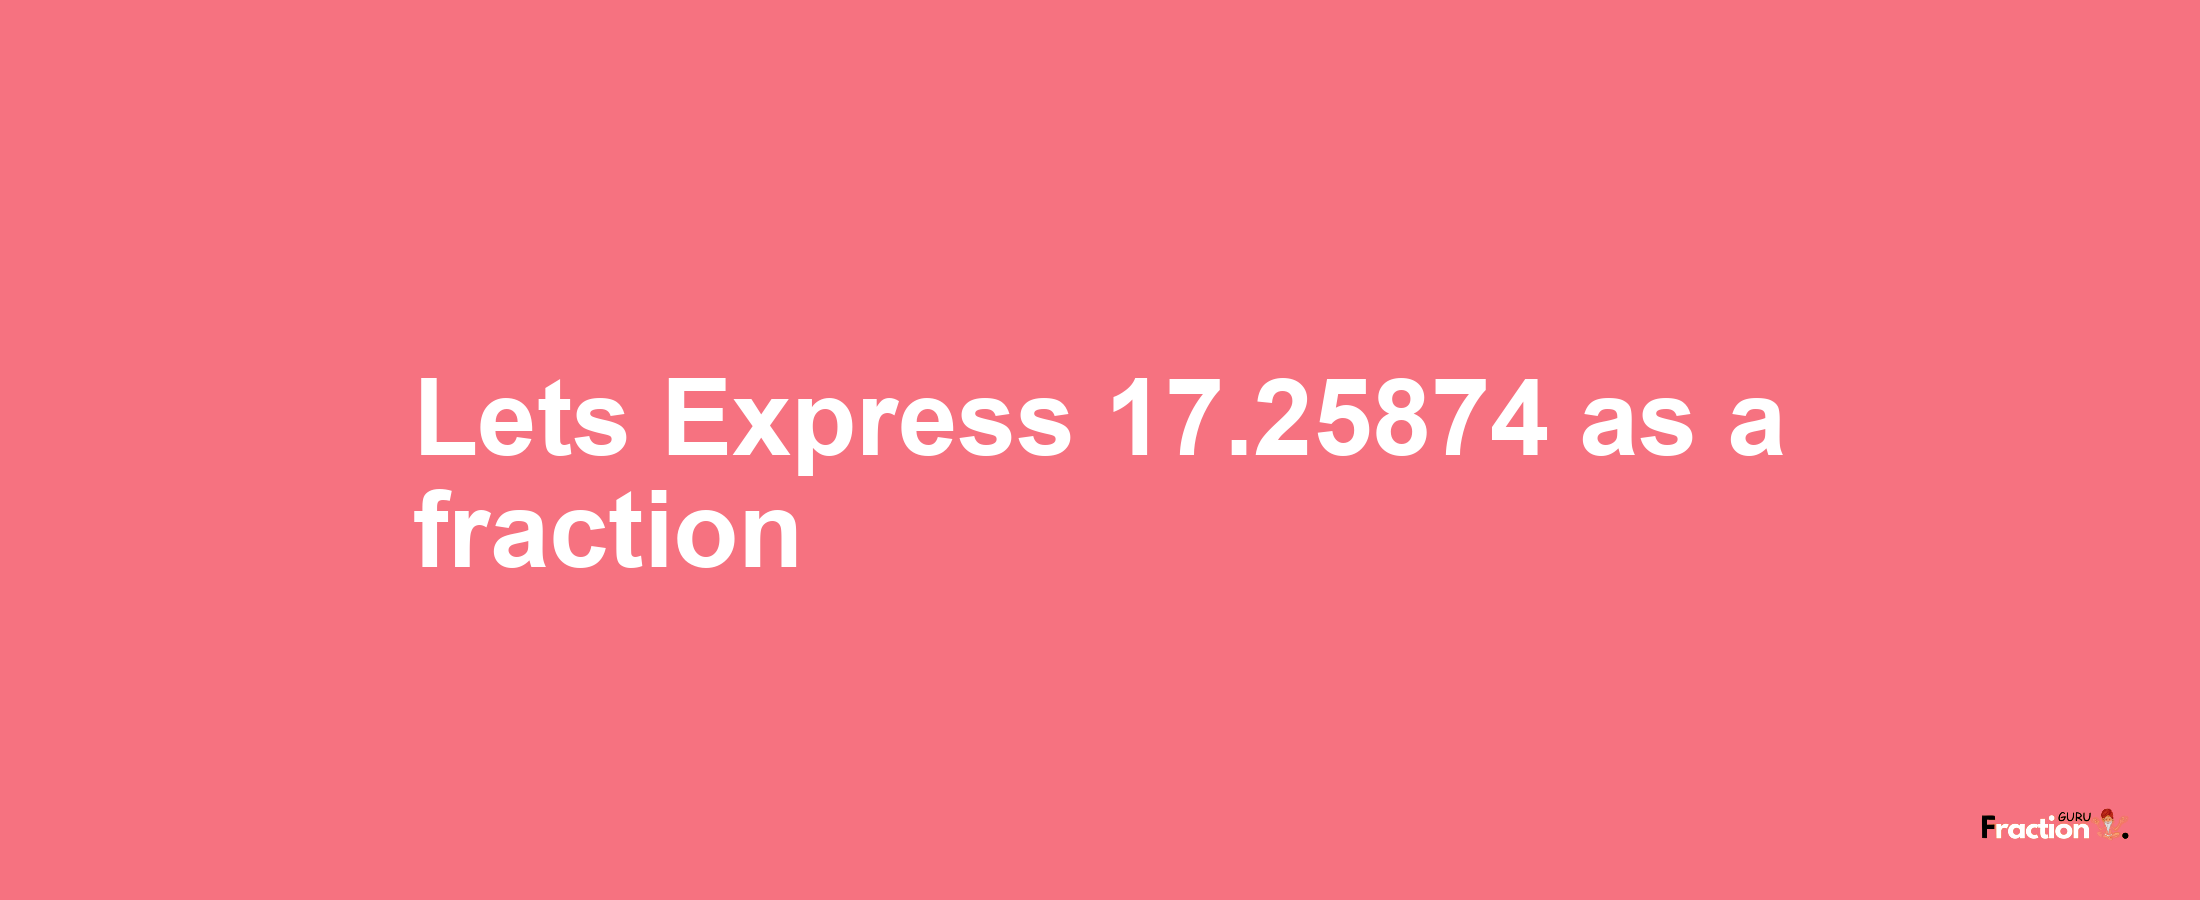 Lets Express 17.25874 as afraction